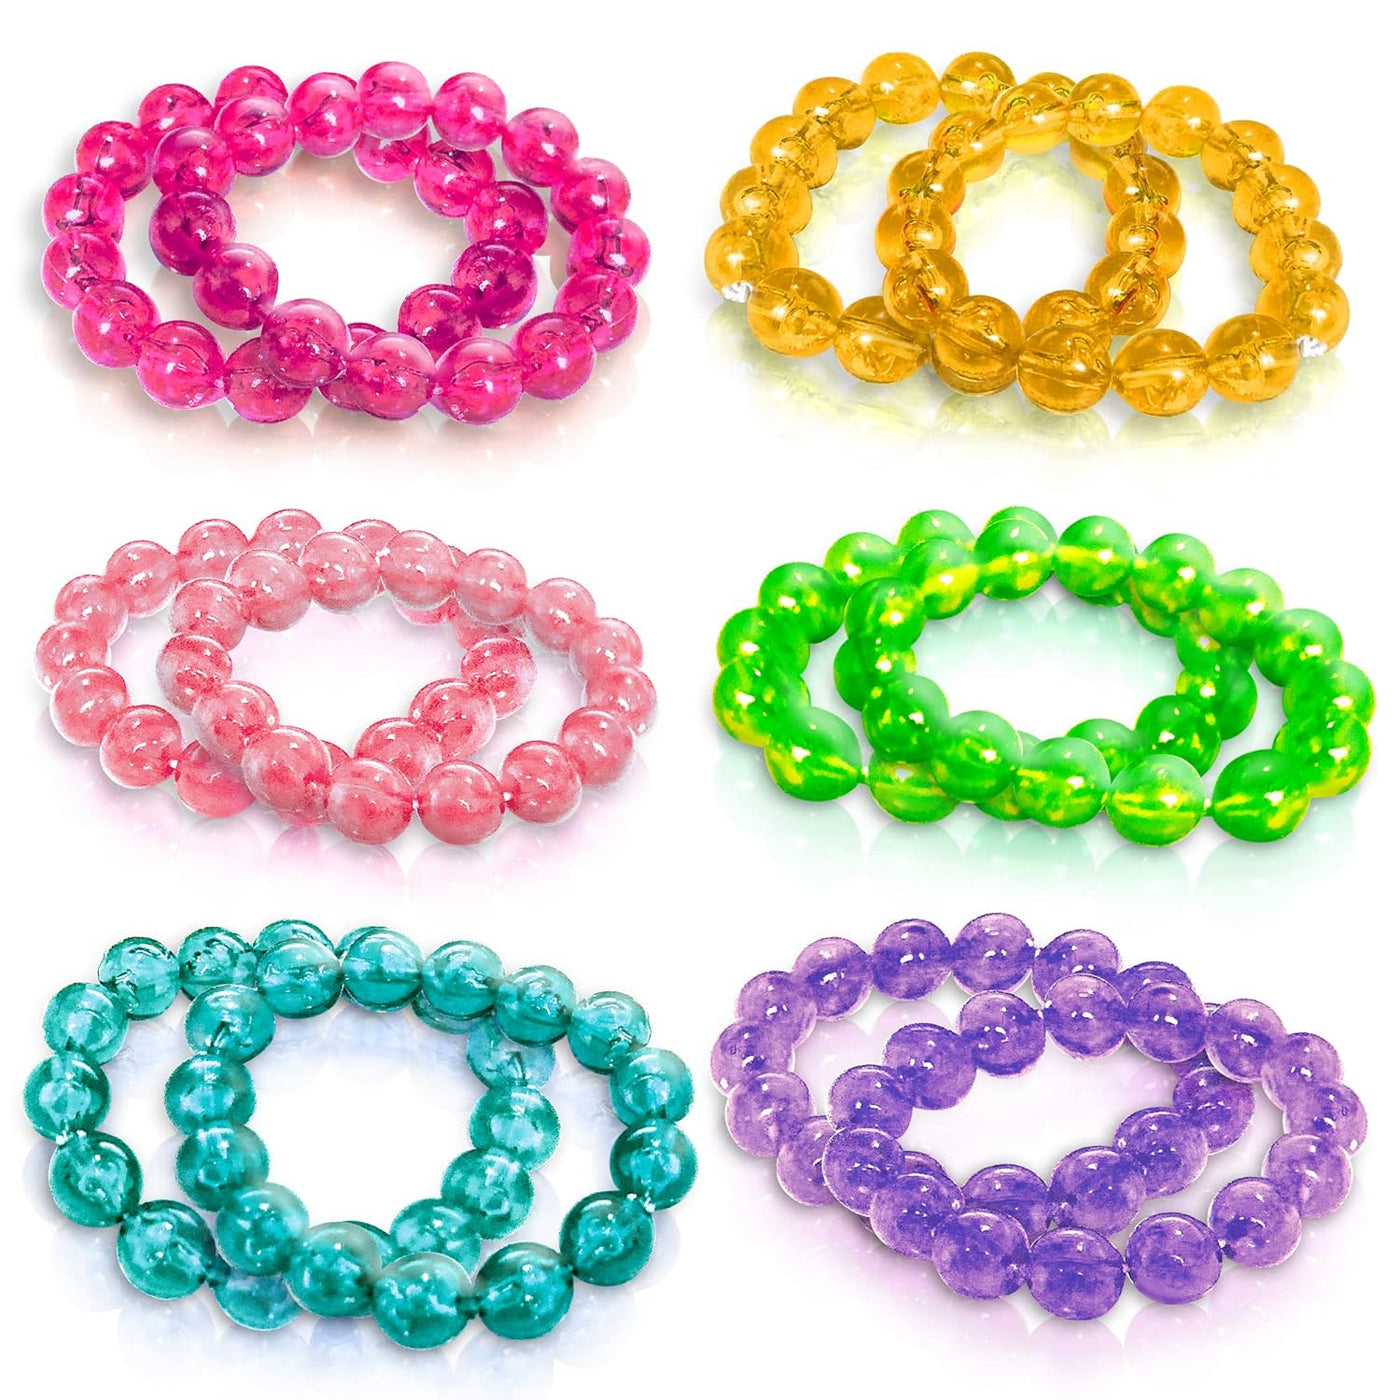 ArtCreativity Bead Bracelets for Kids- 12 Pack- Toy Jewelry Wristbands for Girls- Assorted Colors- Cute Birthday Favors, Party Decorations and Giveaways, Goody Bag Fillers, Dress Up Accessories